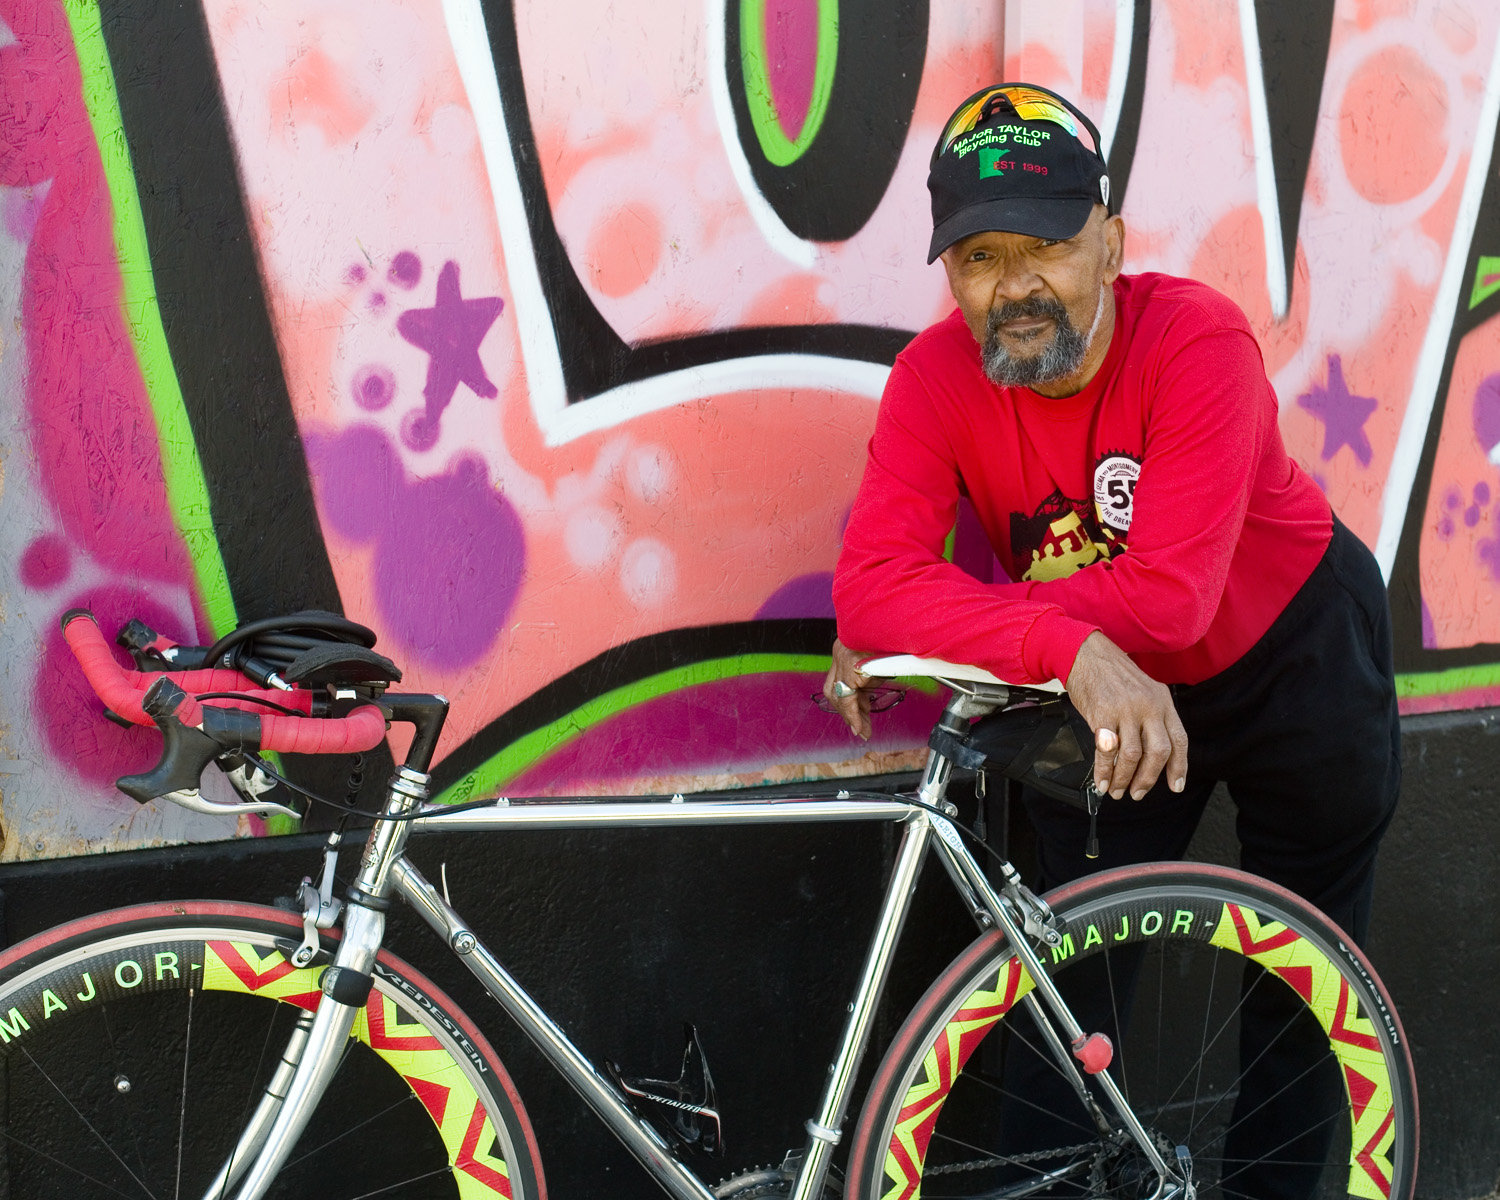 Louie Moore has been president of the Major Taylor Bicycling Club of Minnesota for 22 years. He is a tireless advocate for cycling: promoting the sport in communities of color, and improving biking conditions across the city for all. Club rides meet at his home near 48th Street and Columbus Avenue in South Minneapolis. Moore was the first Black person to buy a home on his block, and has lived there for 57 years. (Photo by Margie O’Loughlin)